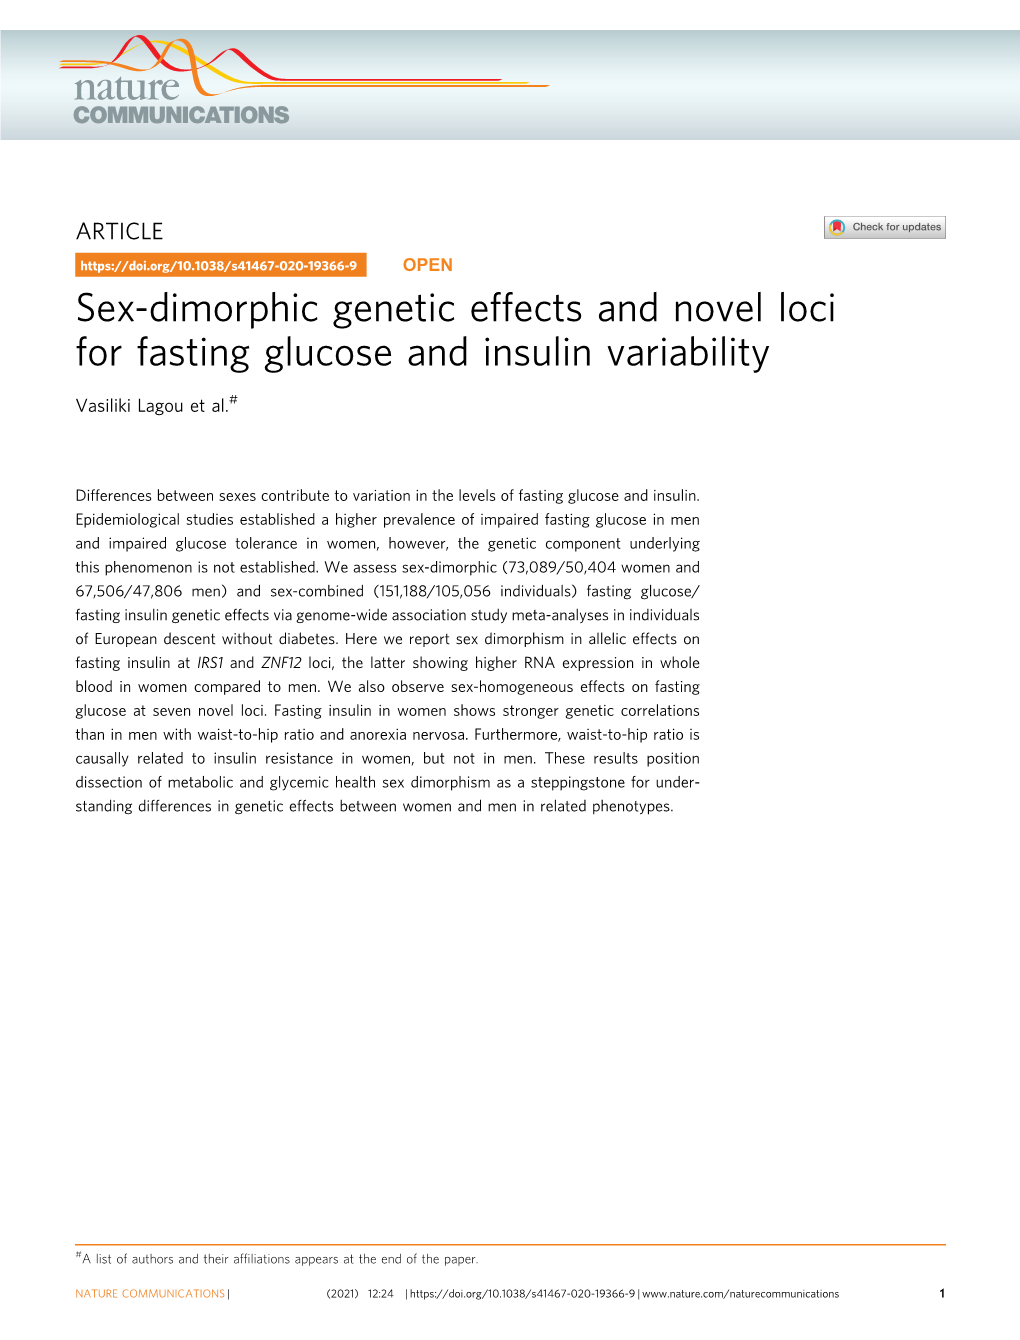 Sex-Dimorphic Genetic Effects and Novel Loci for Fasting Glucose and Insulin Variability